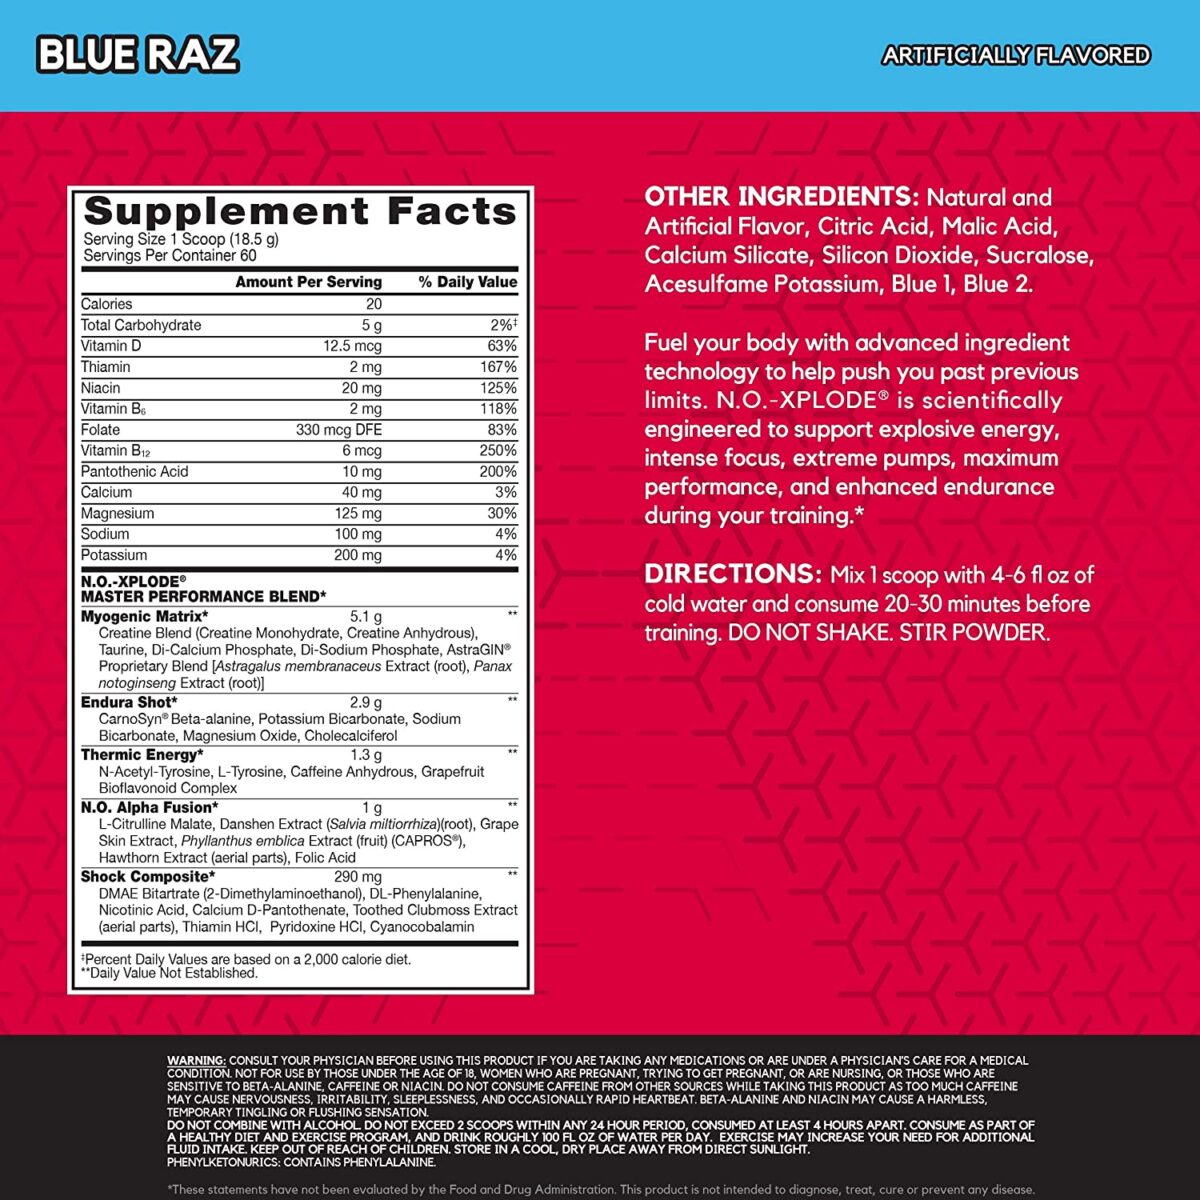 BSN N.O.-XPLODE Pre-Workout Supplement with Creatine, Beta-Alanine, and Energy, Flavor Blue Raz, 60 Servings